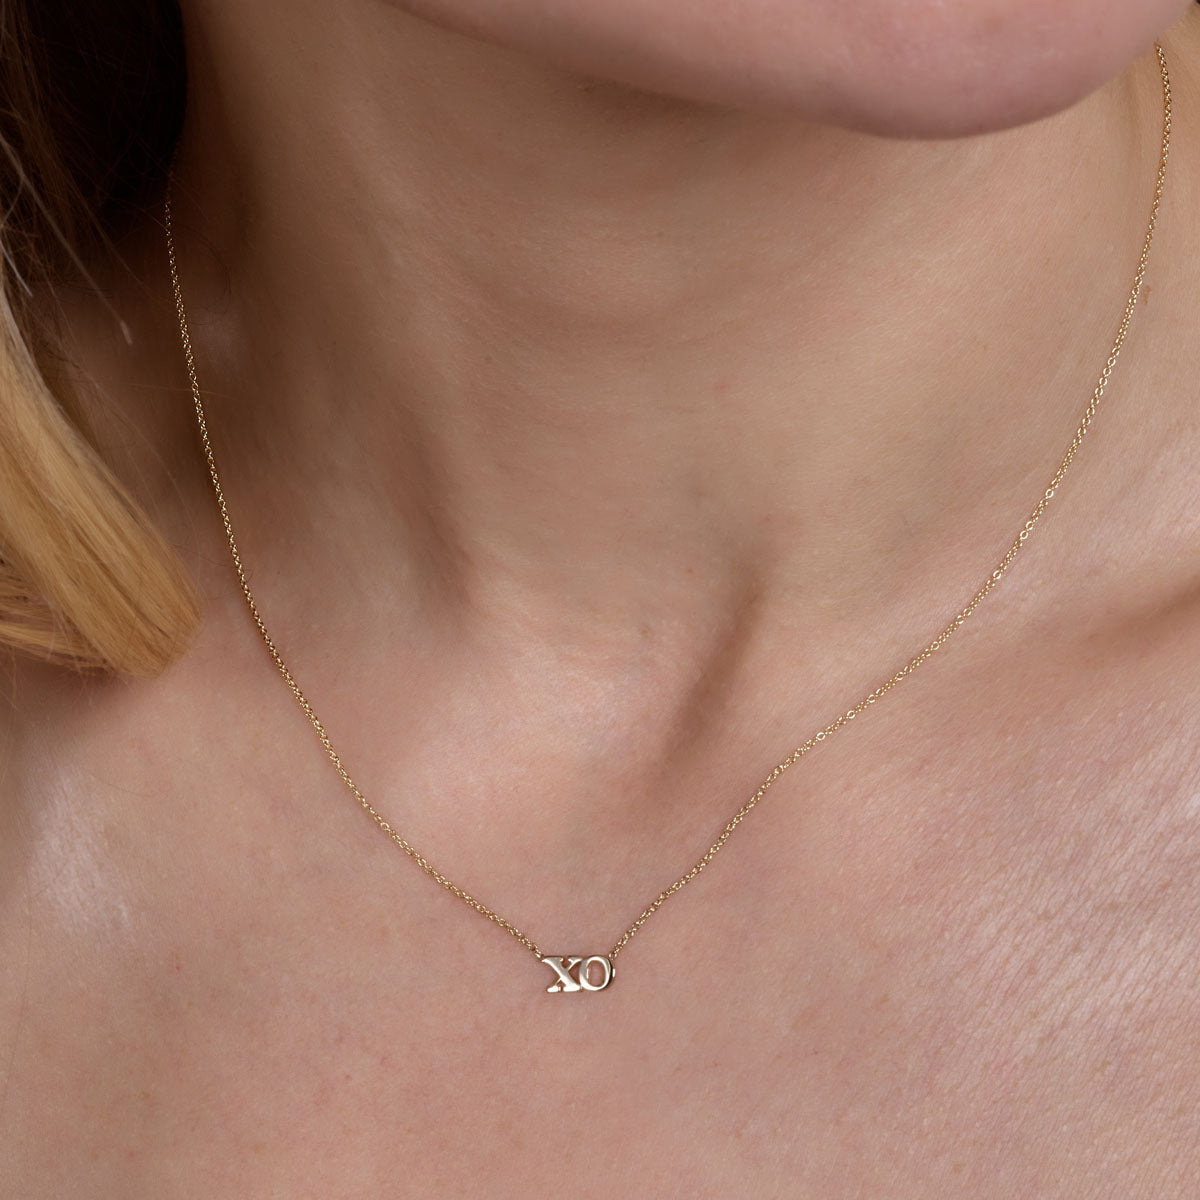 gold XO necklace on womans neck